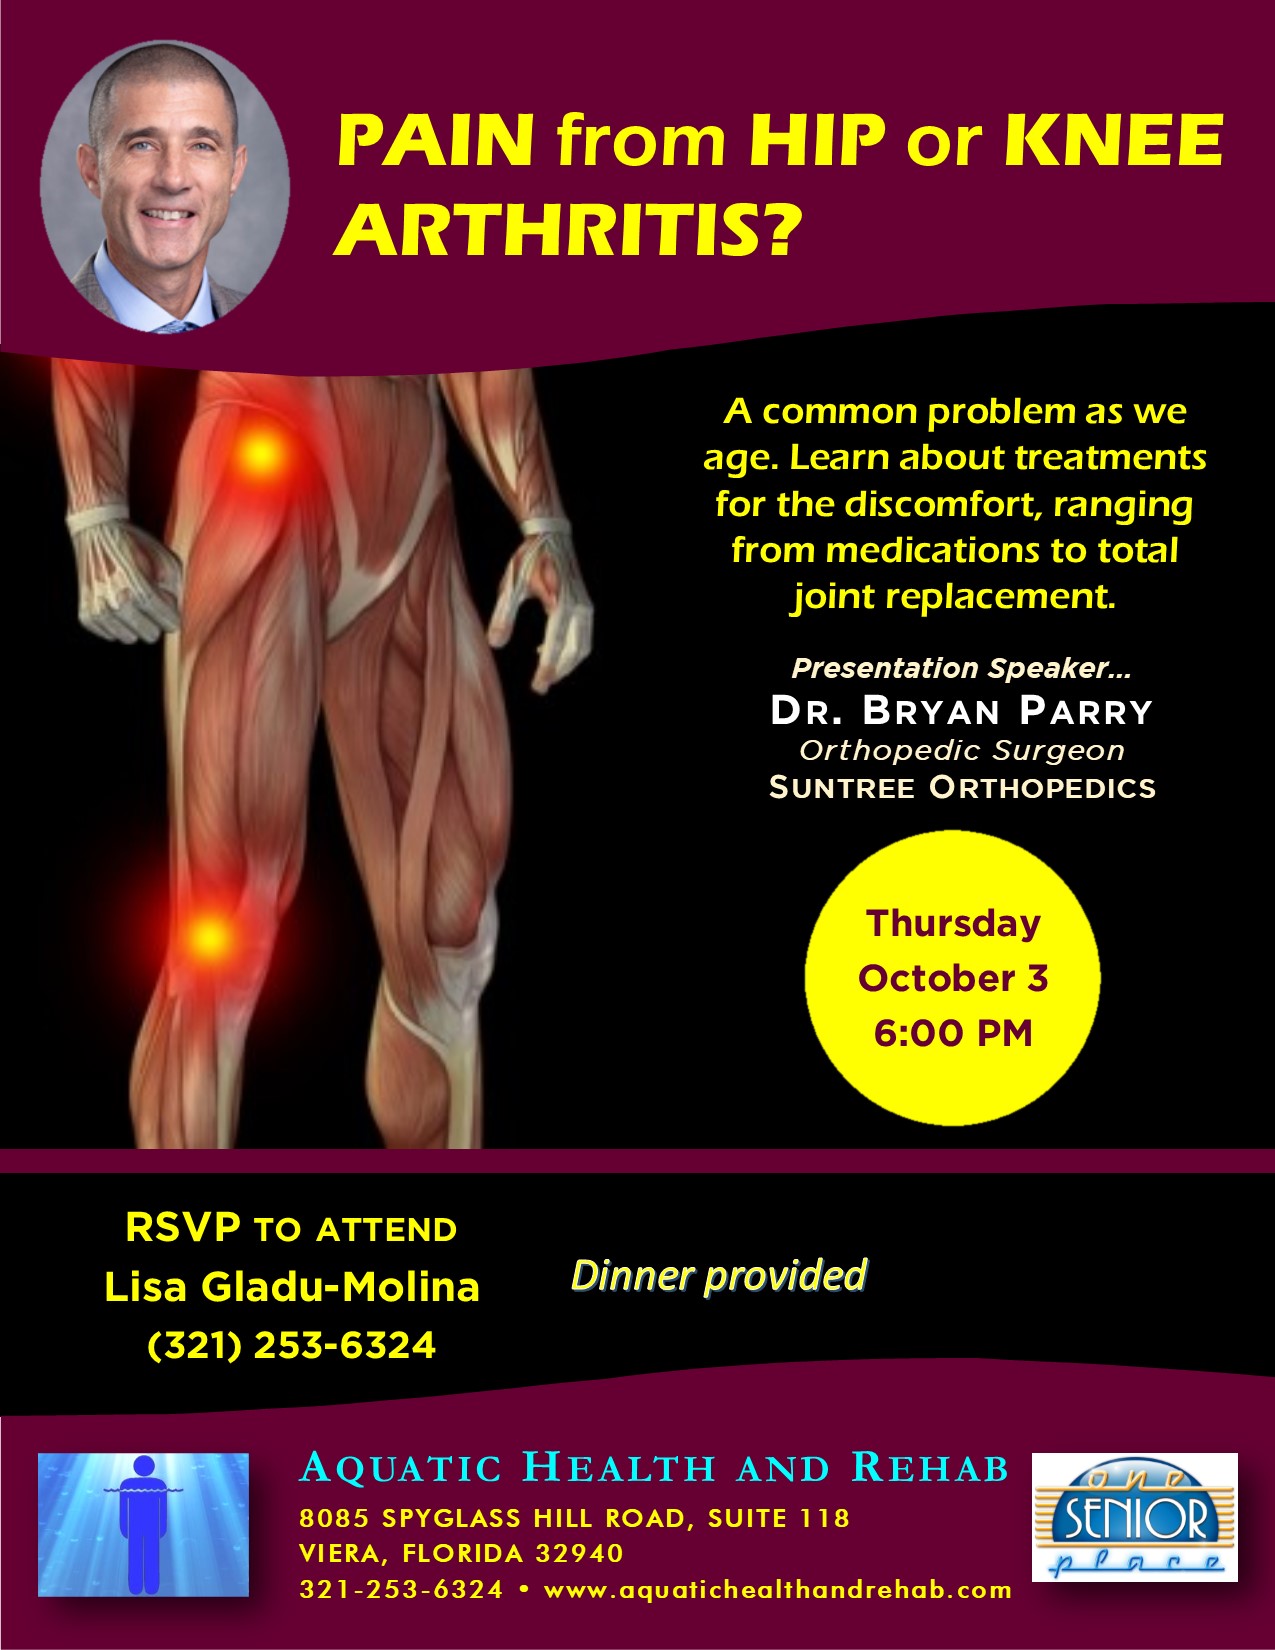 Pain from Hip or Knee Arthritis? Presented by Dr. Bryan Parry and Hosted by Aquatic Health and Rehab